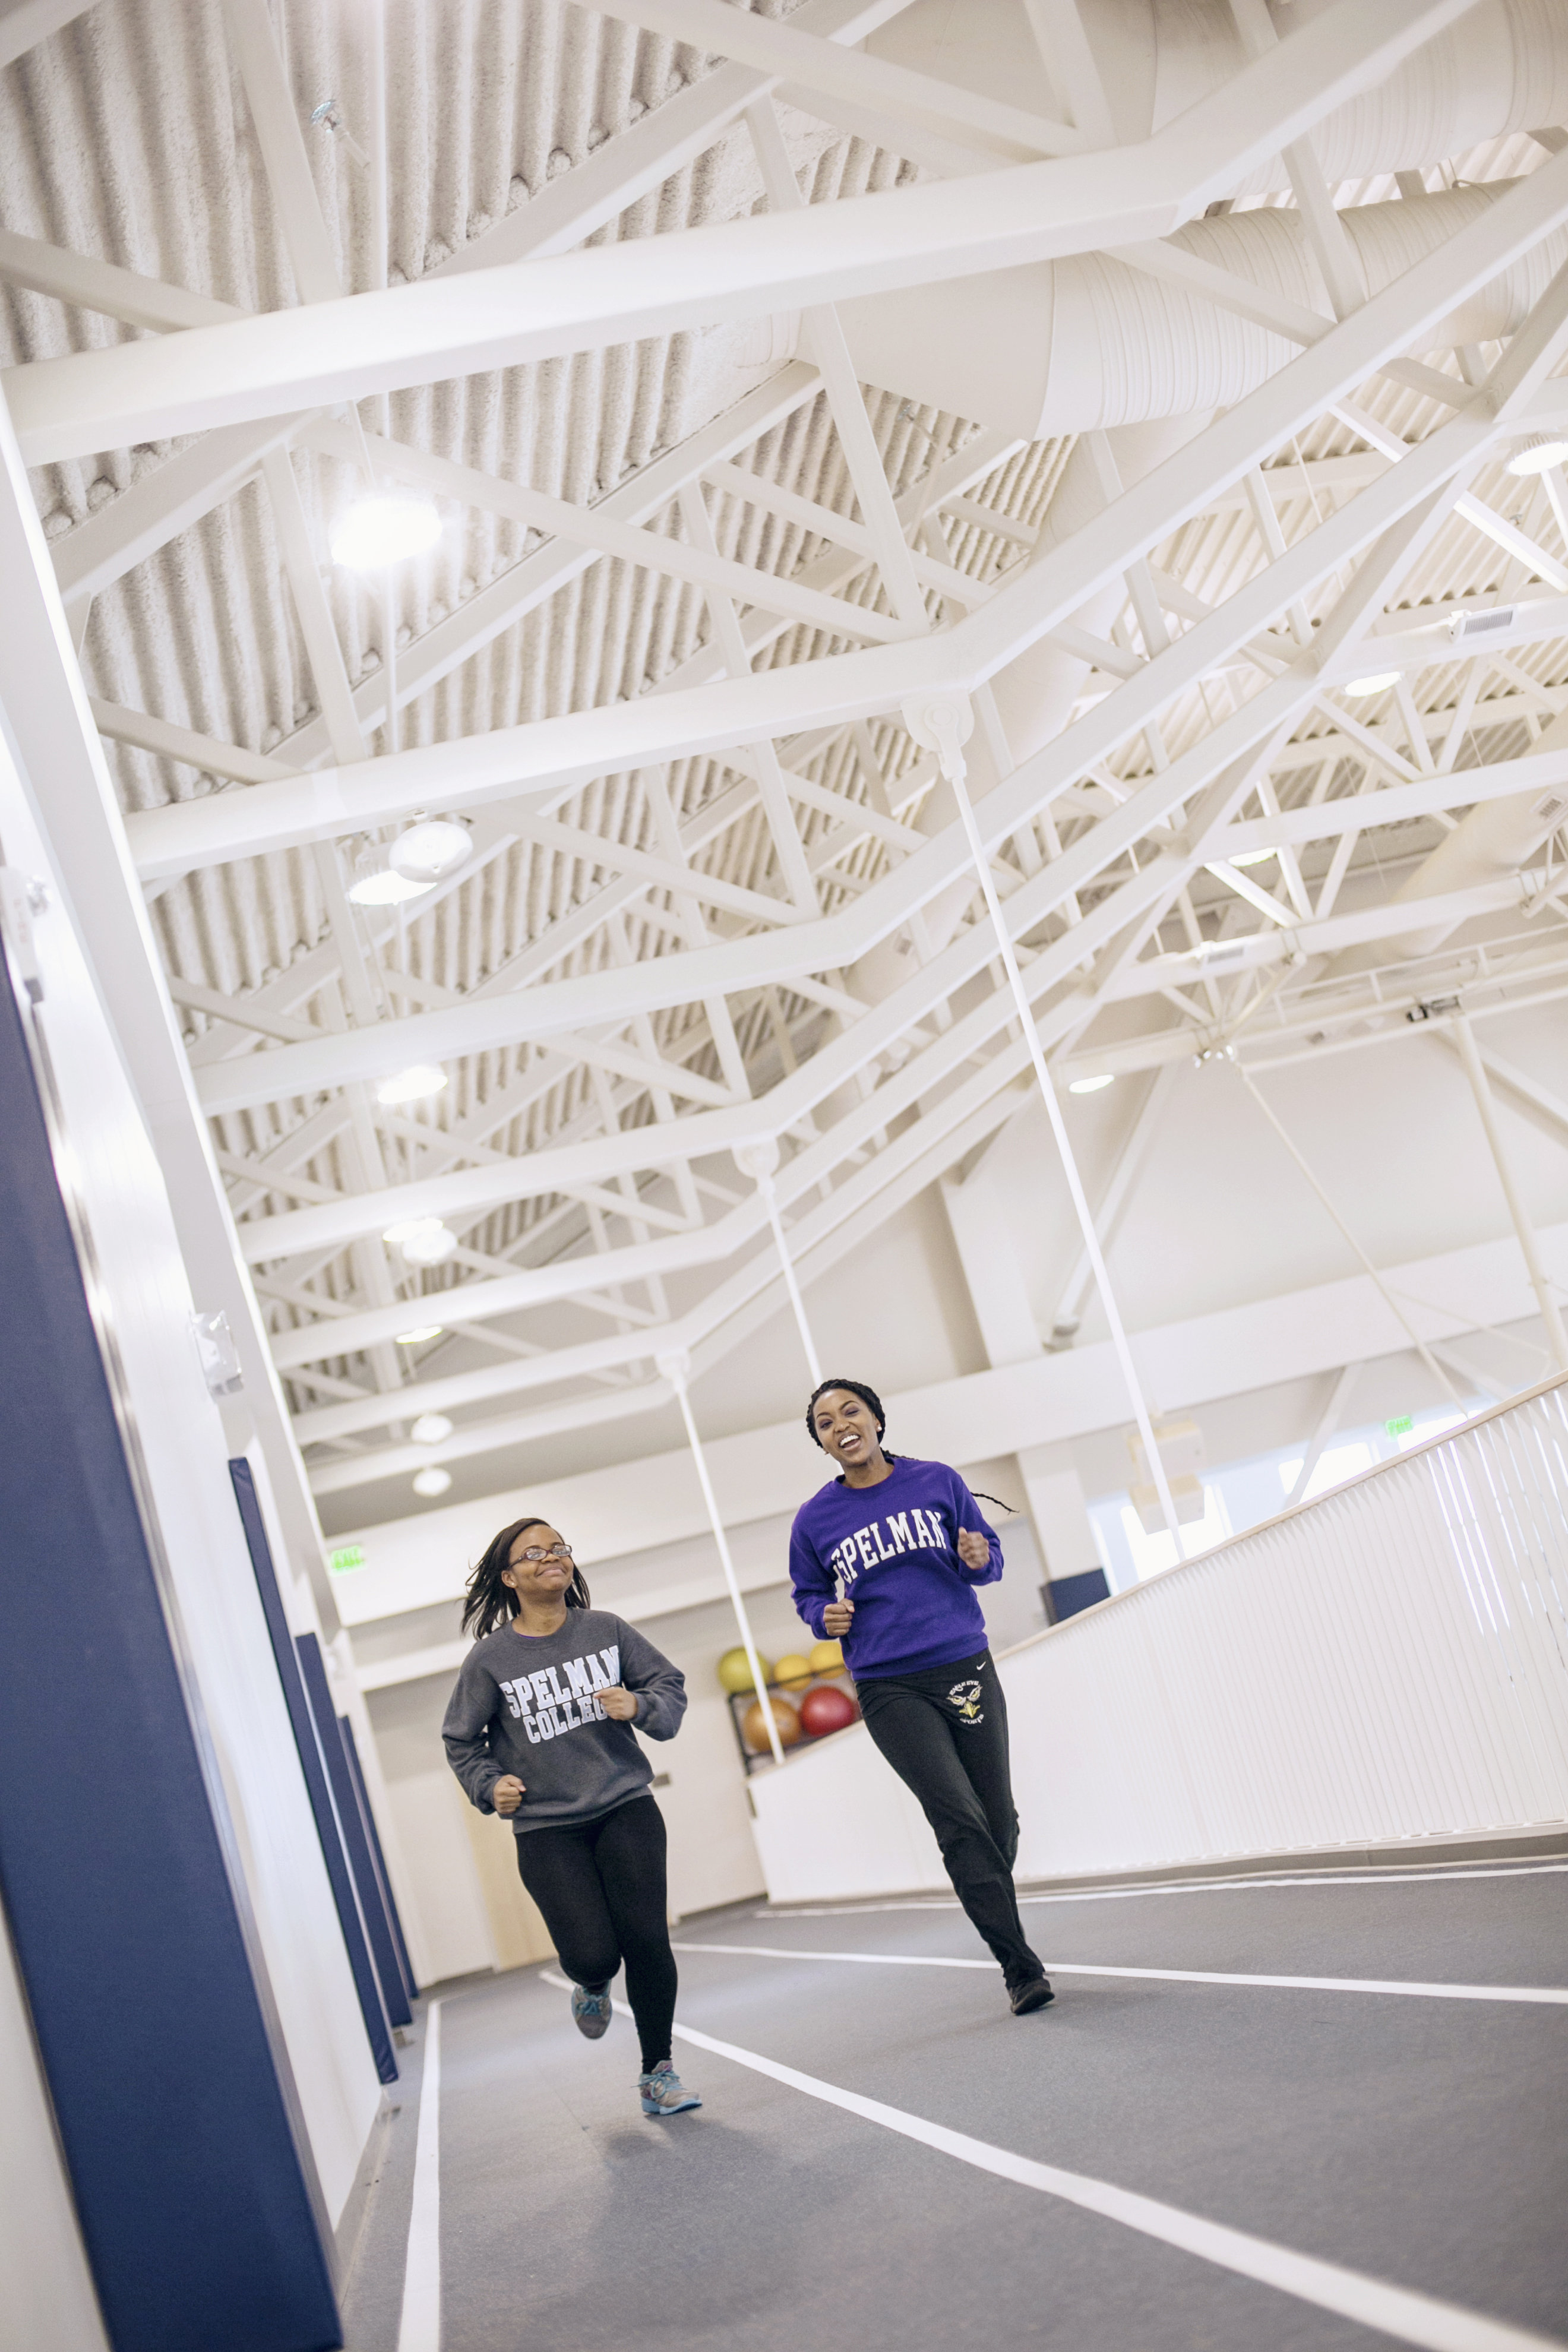 Two students at Spelman University run on an indoor track.